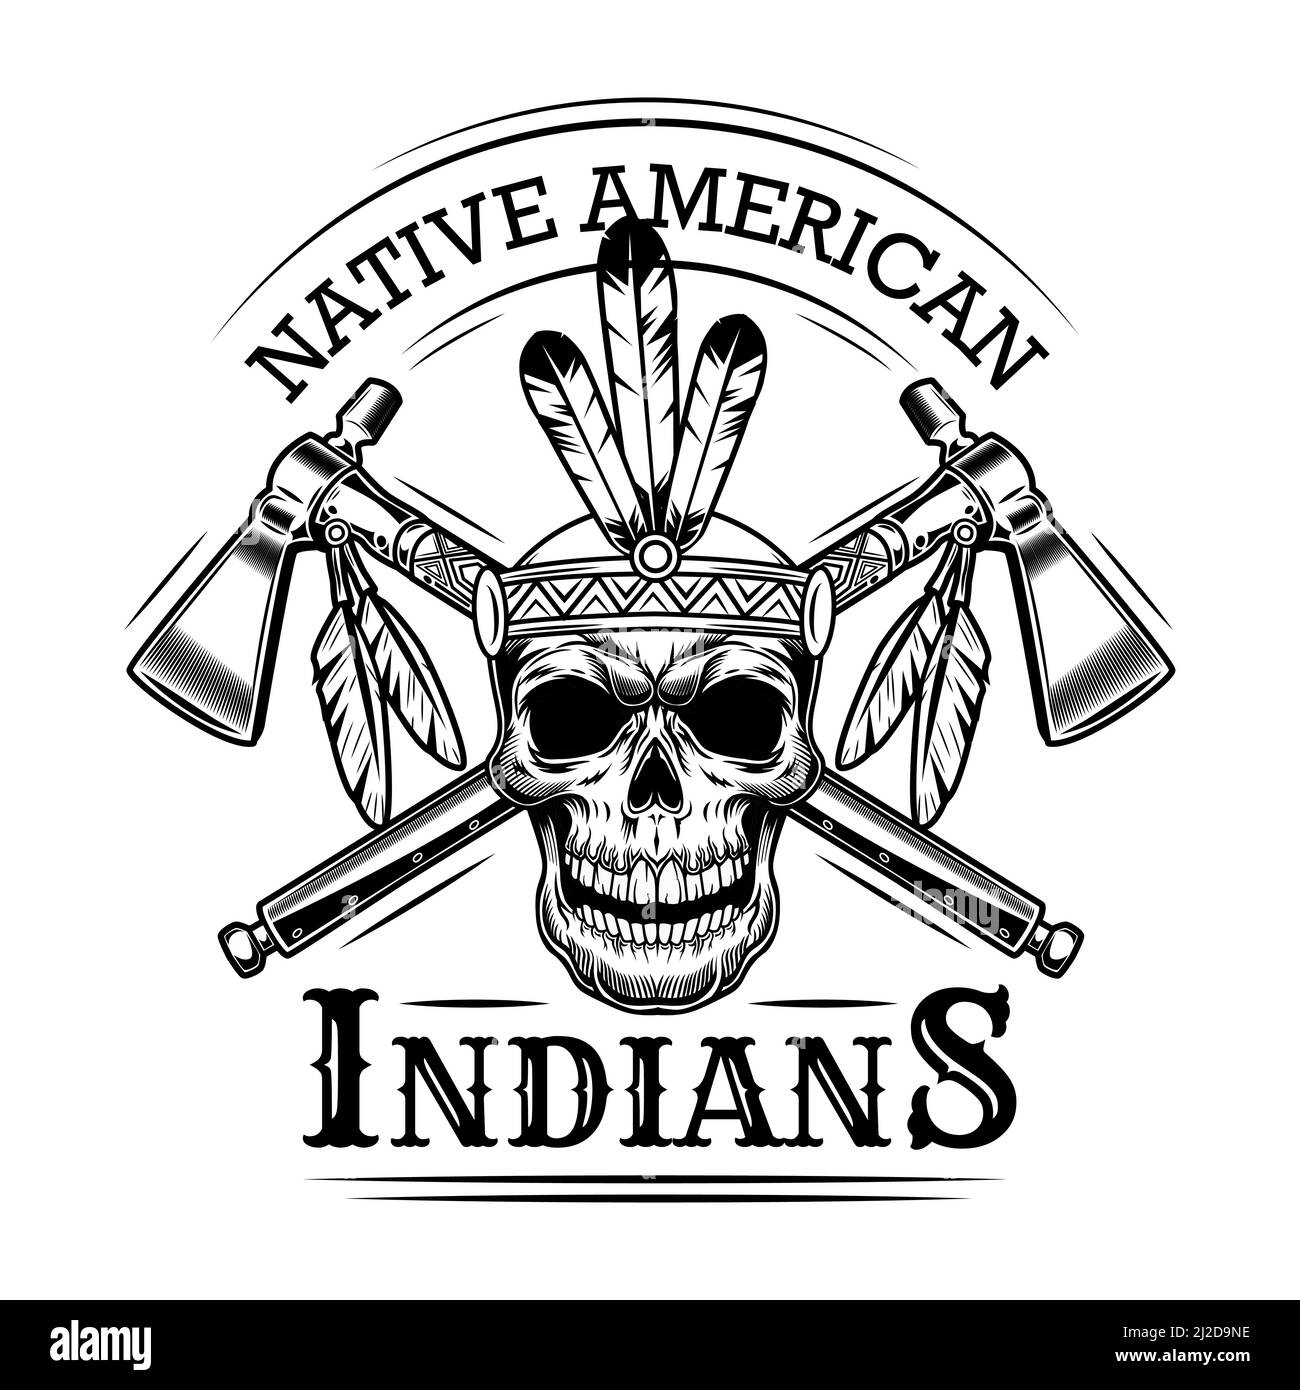 Native American skull vector illustration. Head of skeleton with feather hairband, crossed axes and text. Native Americans and Red Indian concept for Stock Vector